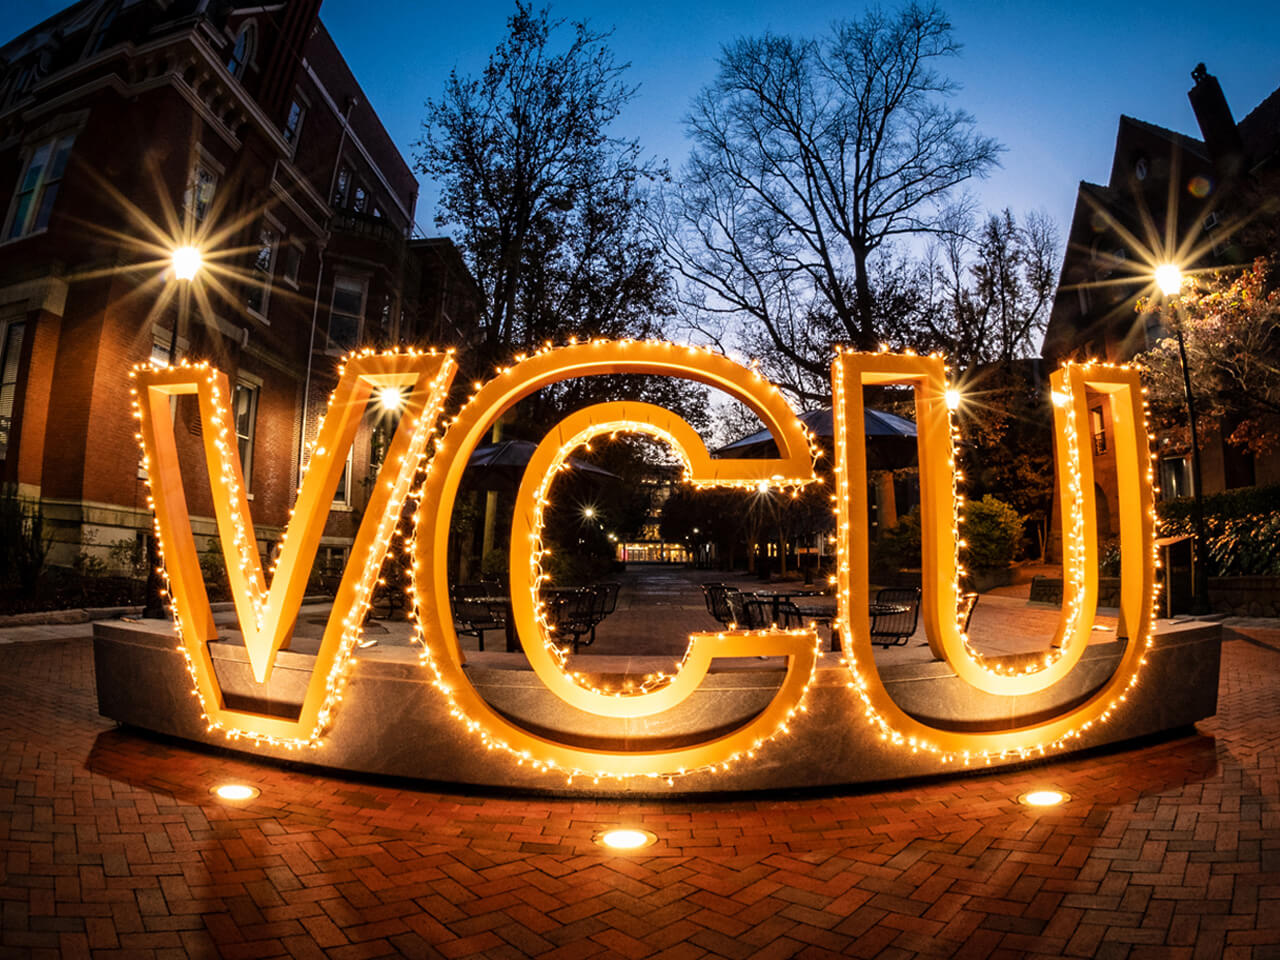 VCU in gold letters lit up at night with lights